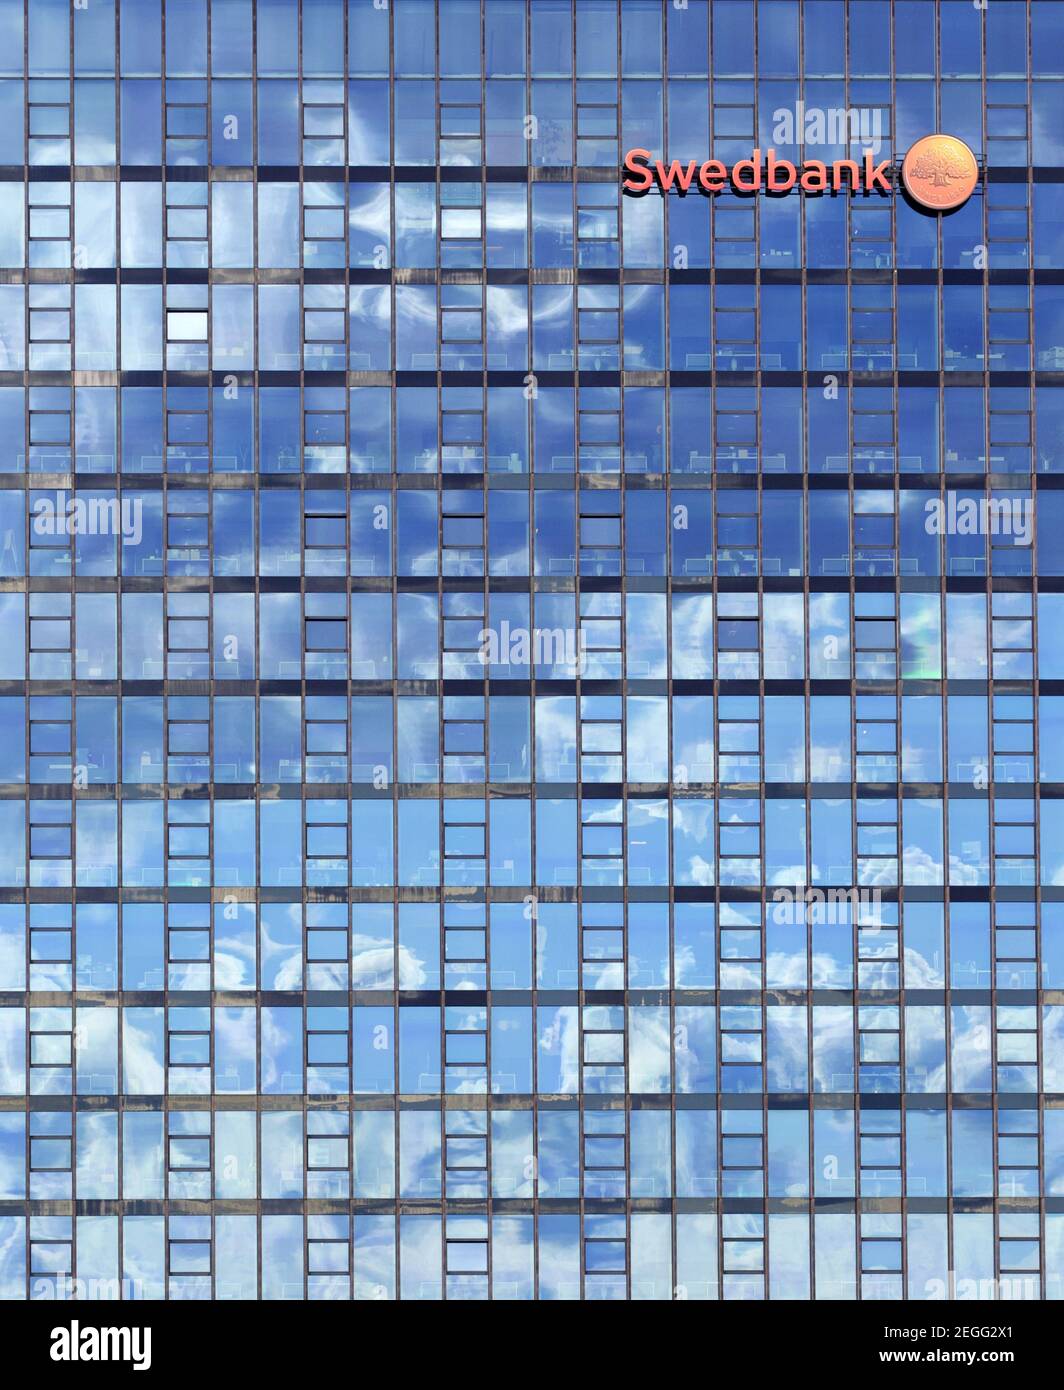 Swedbank head office building in Vilnius, capital of Lithuania. Stock Photo